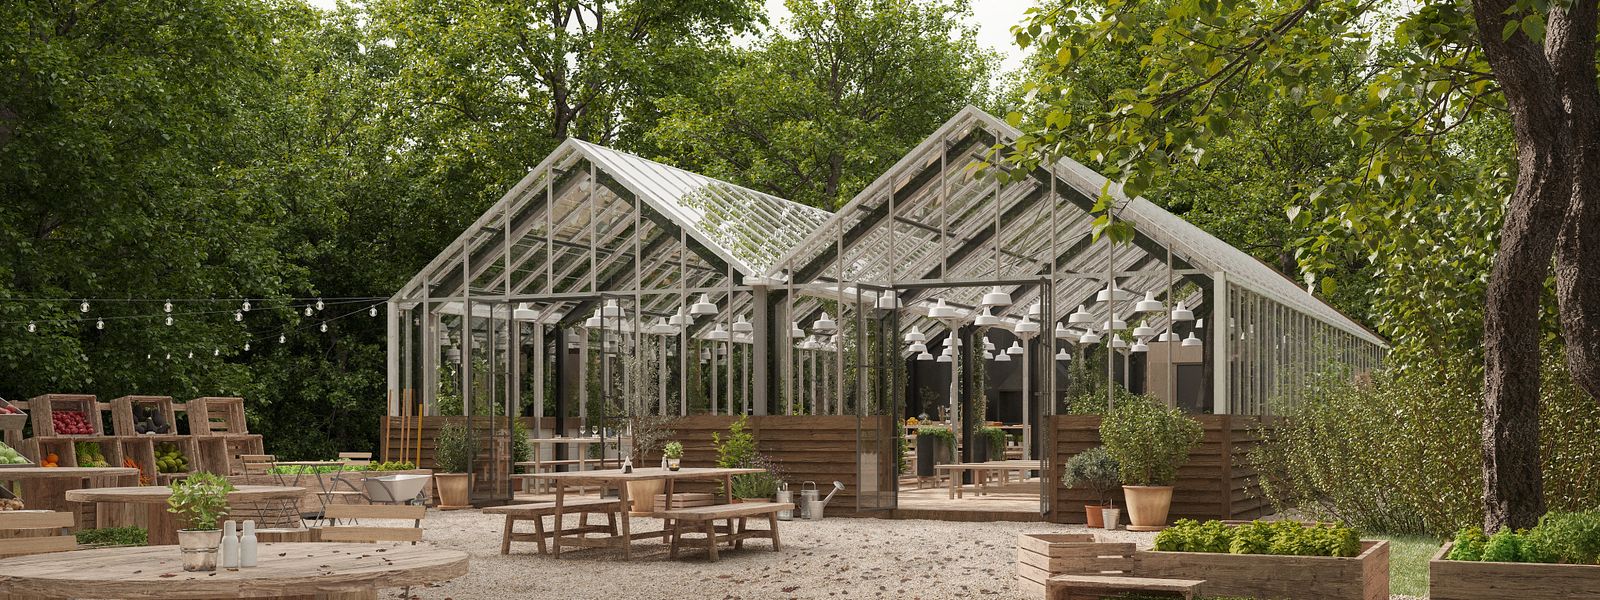 glasshouse in nature